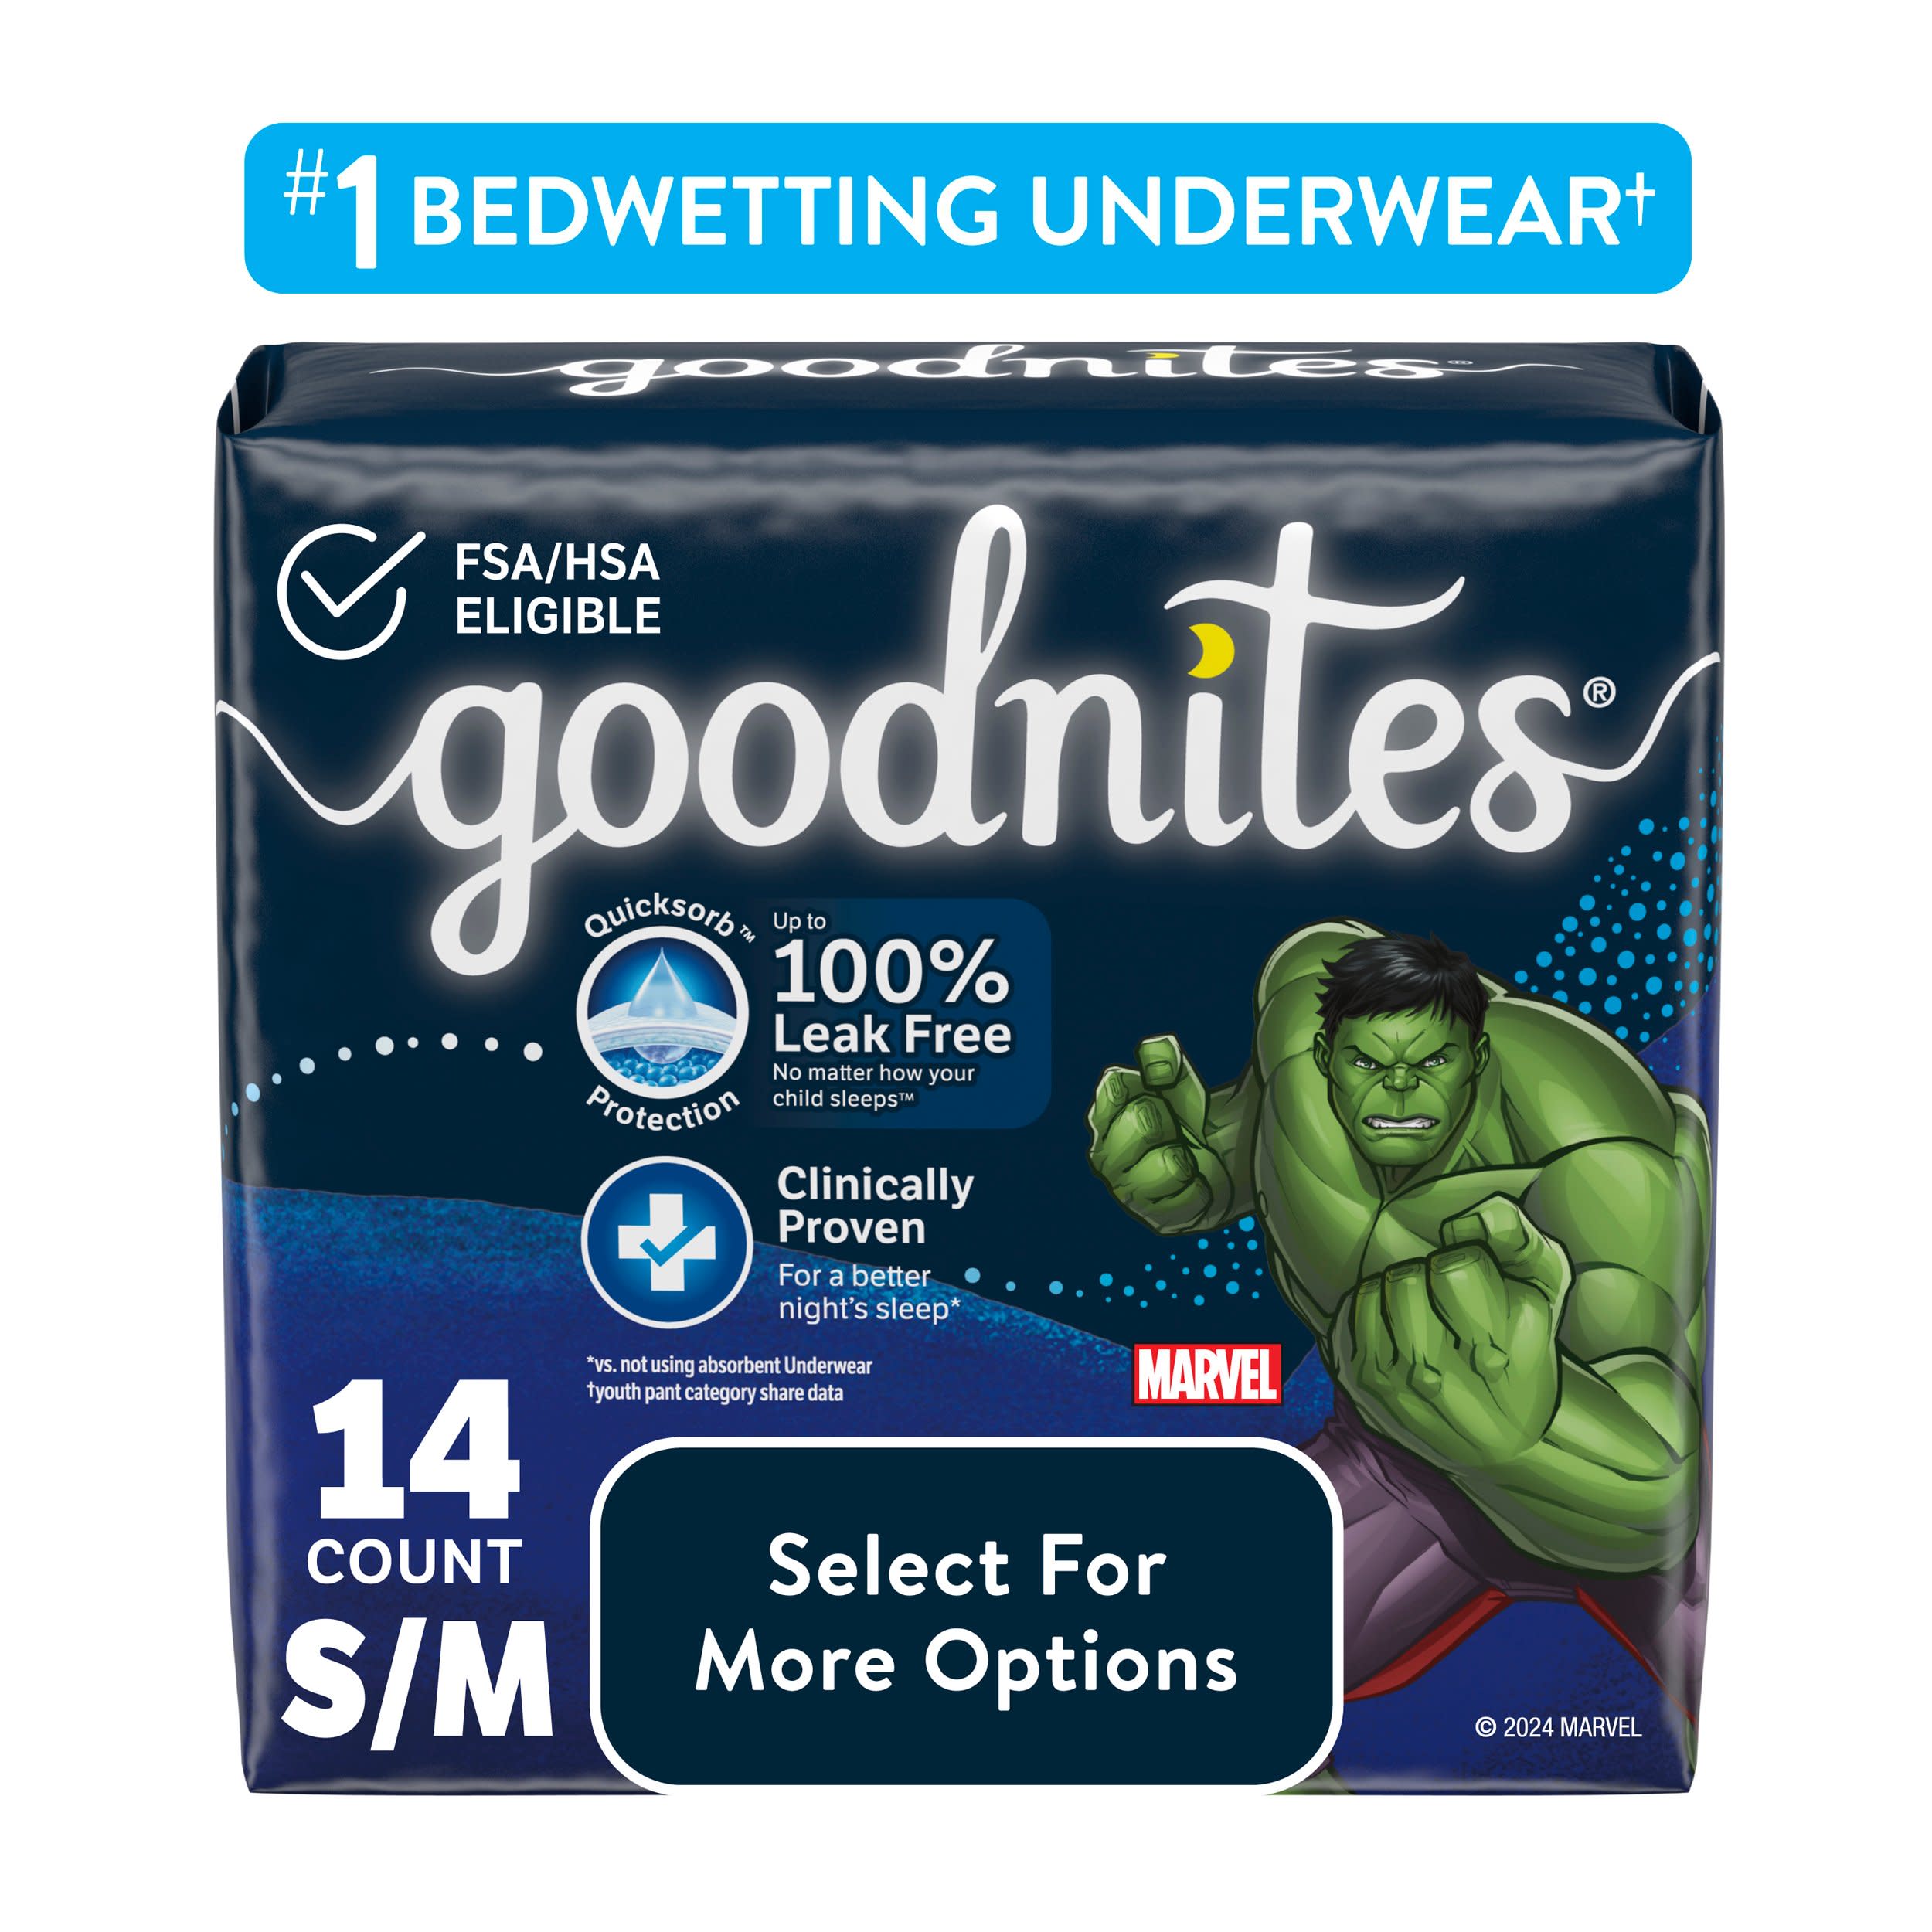 Goodnites Nighttime Bedwetting Underwear for Boys, S/M, 14 Ct (Select for More Options) - image 1 of 10